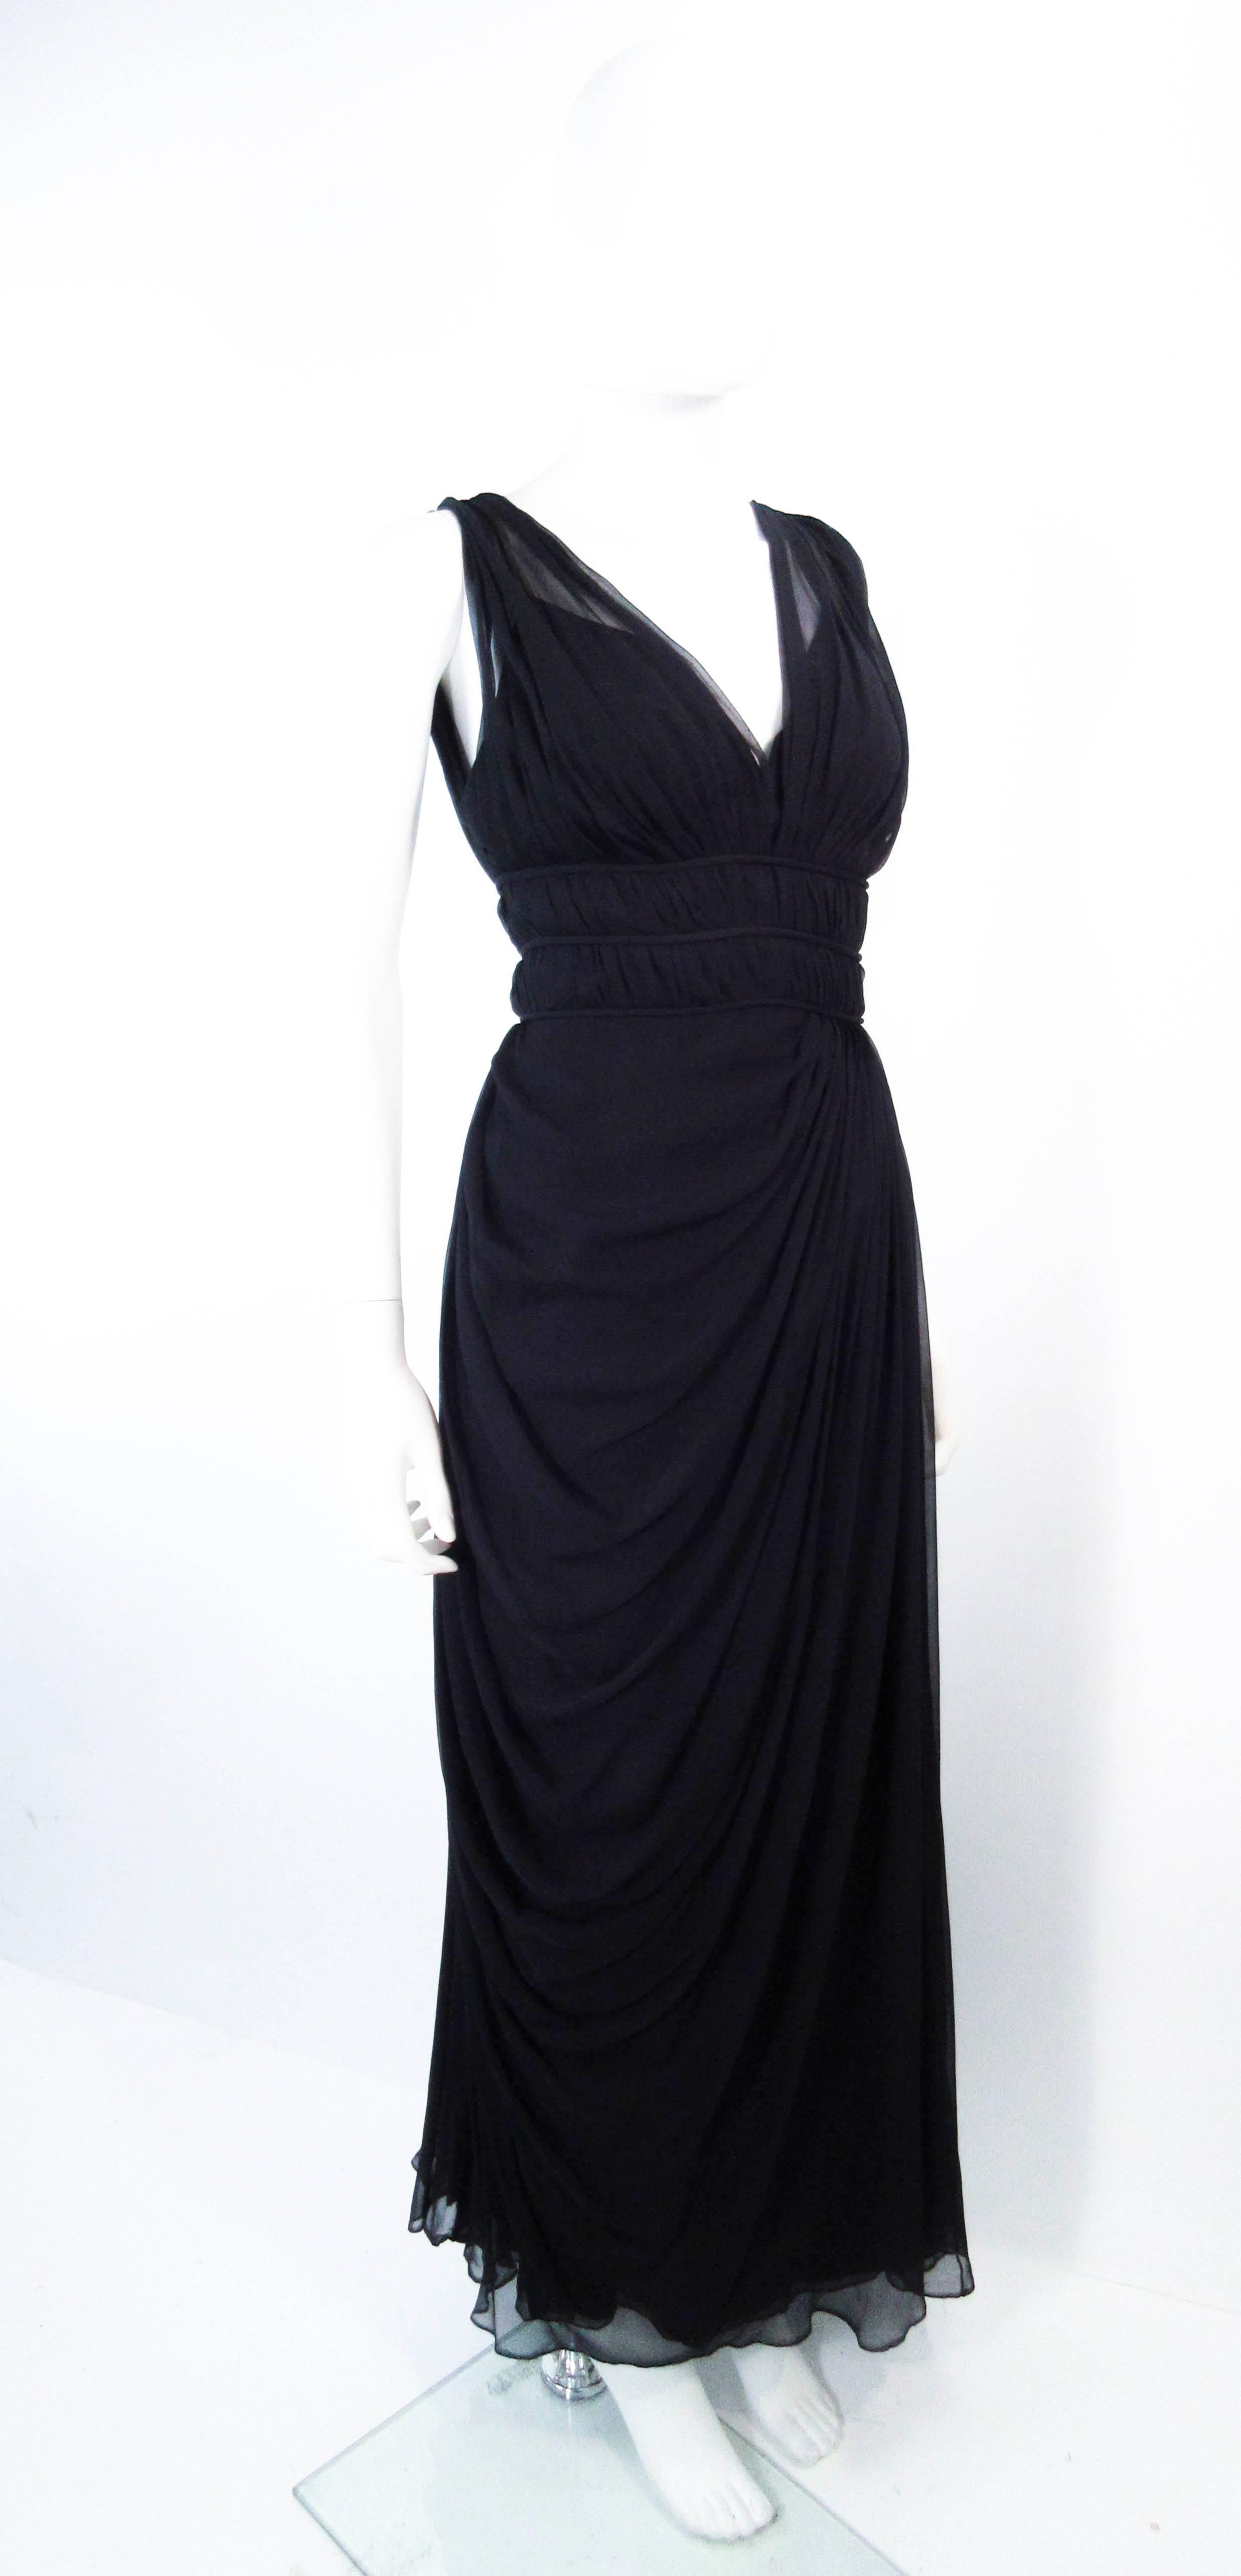 Women's HELEN ROSE Black Silk Chiffon Draped Gown with Empire Waist Size 2 4 For Sale